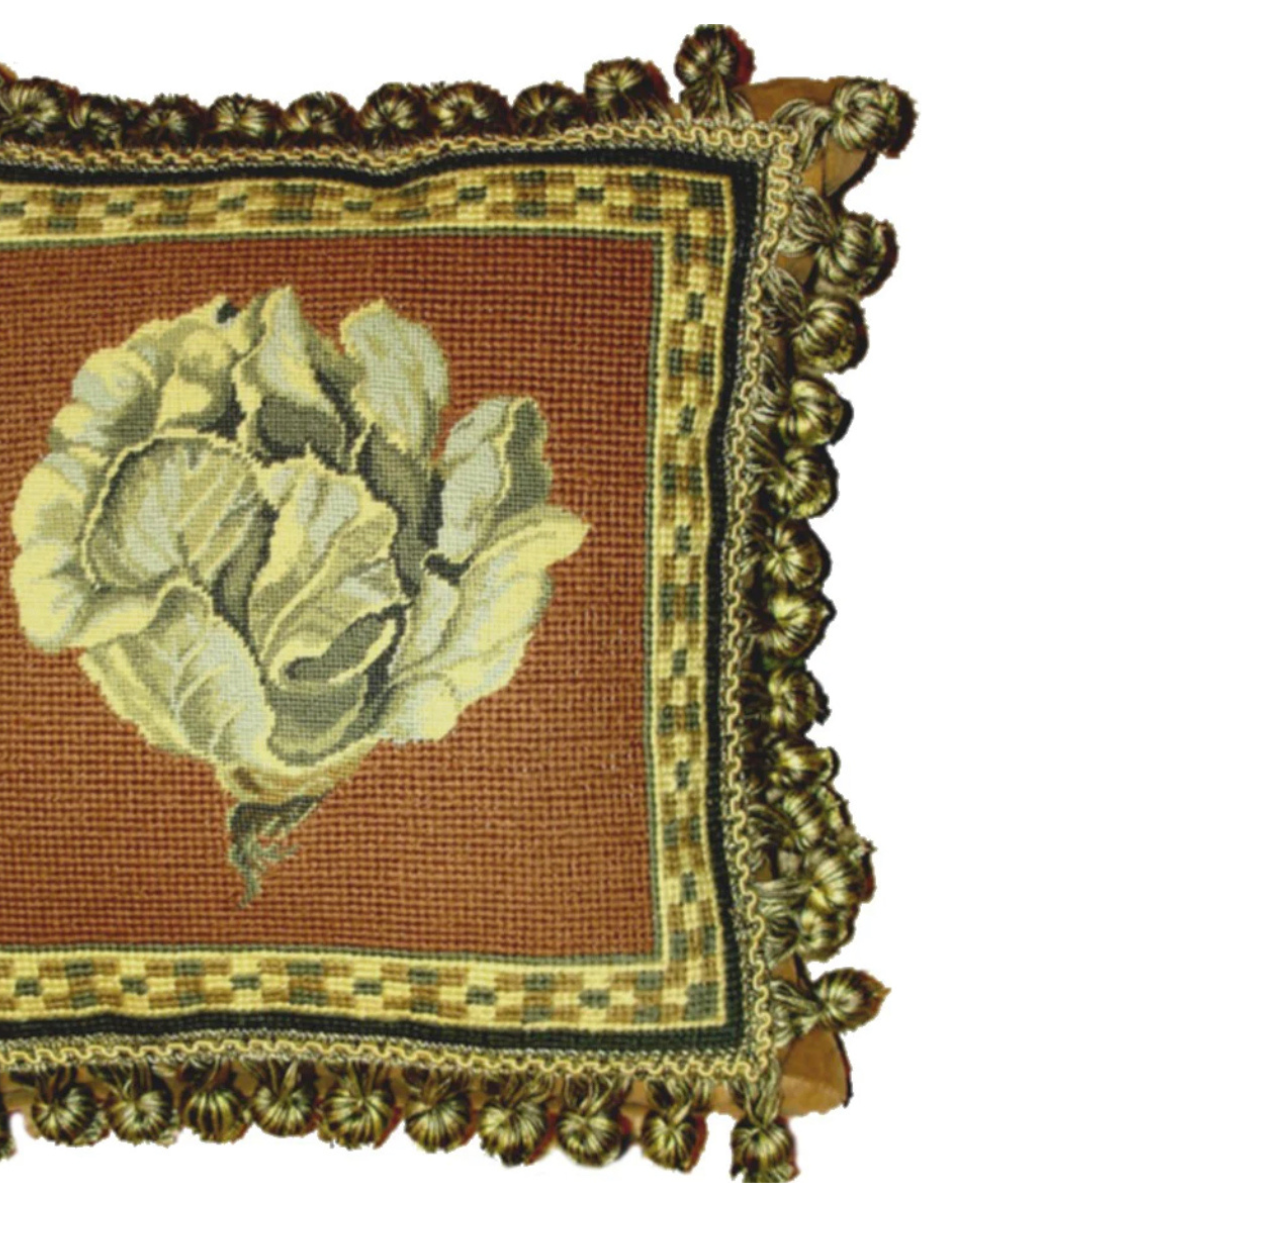 Needlepoint cabbage pillow